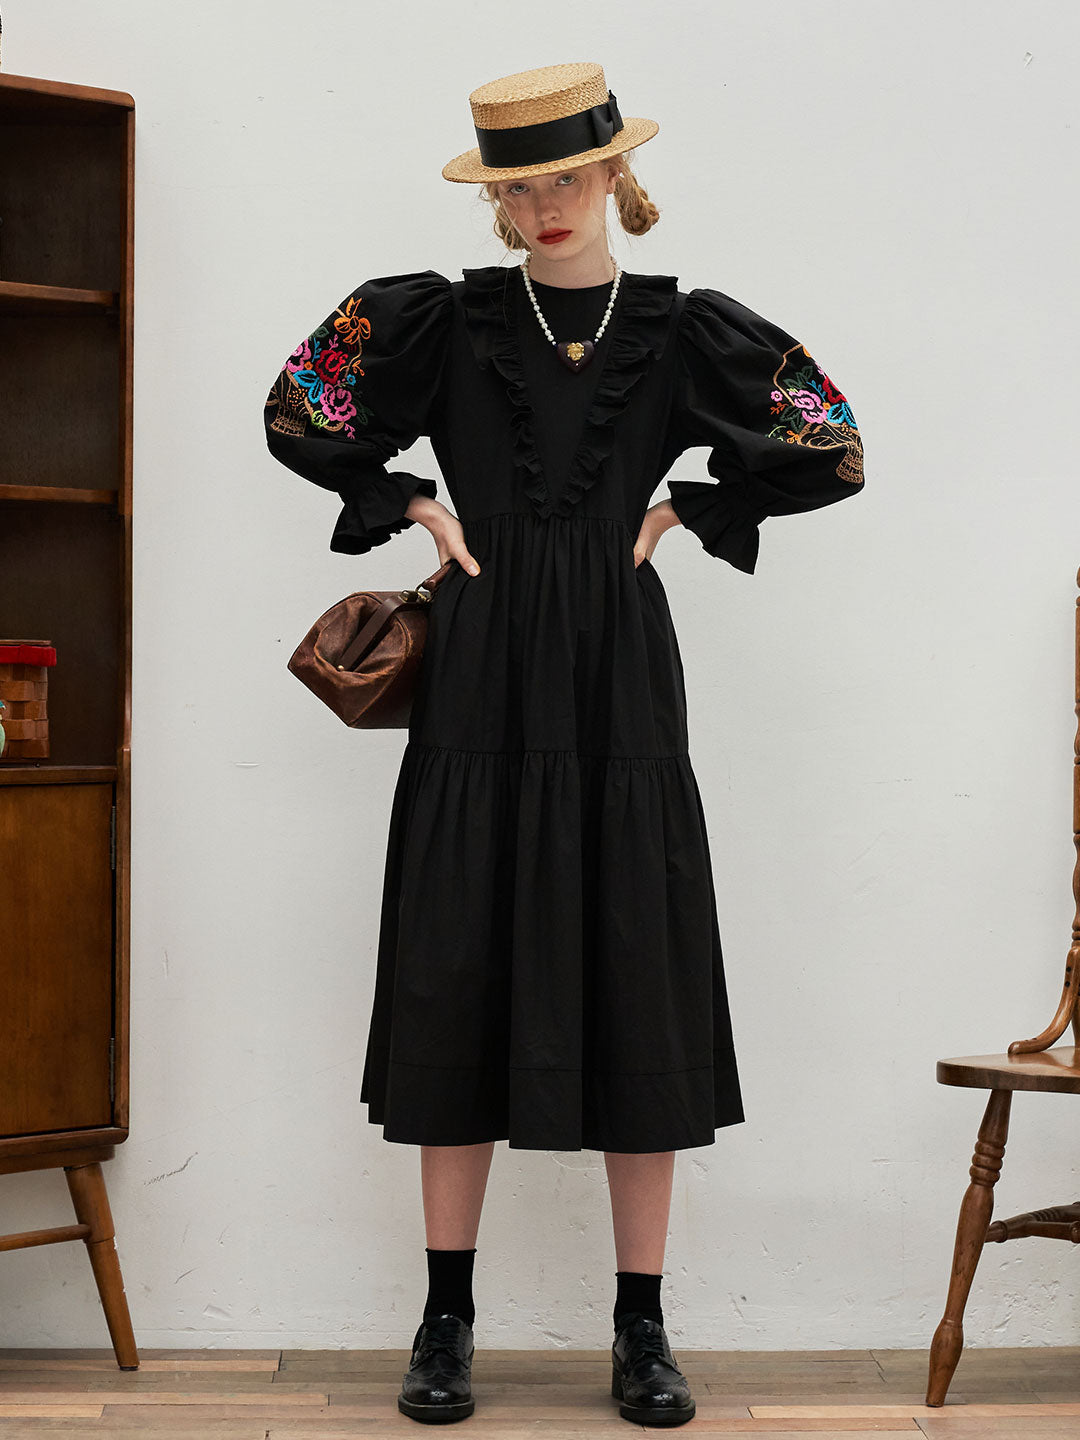 Unlogical Poem Puff Sleeve Embroidered Dress